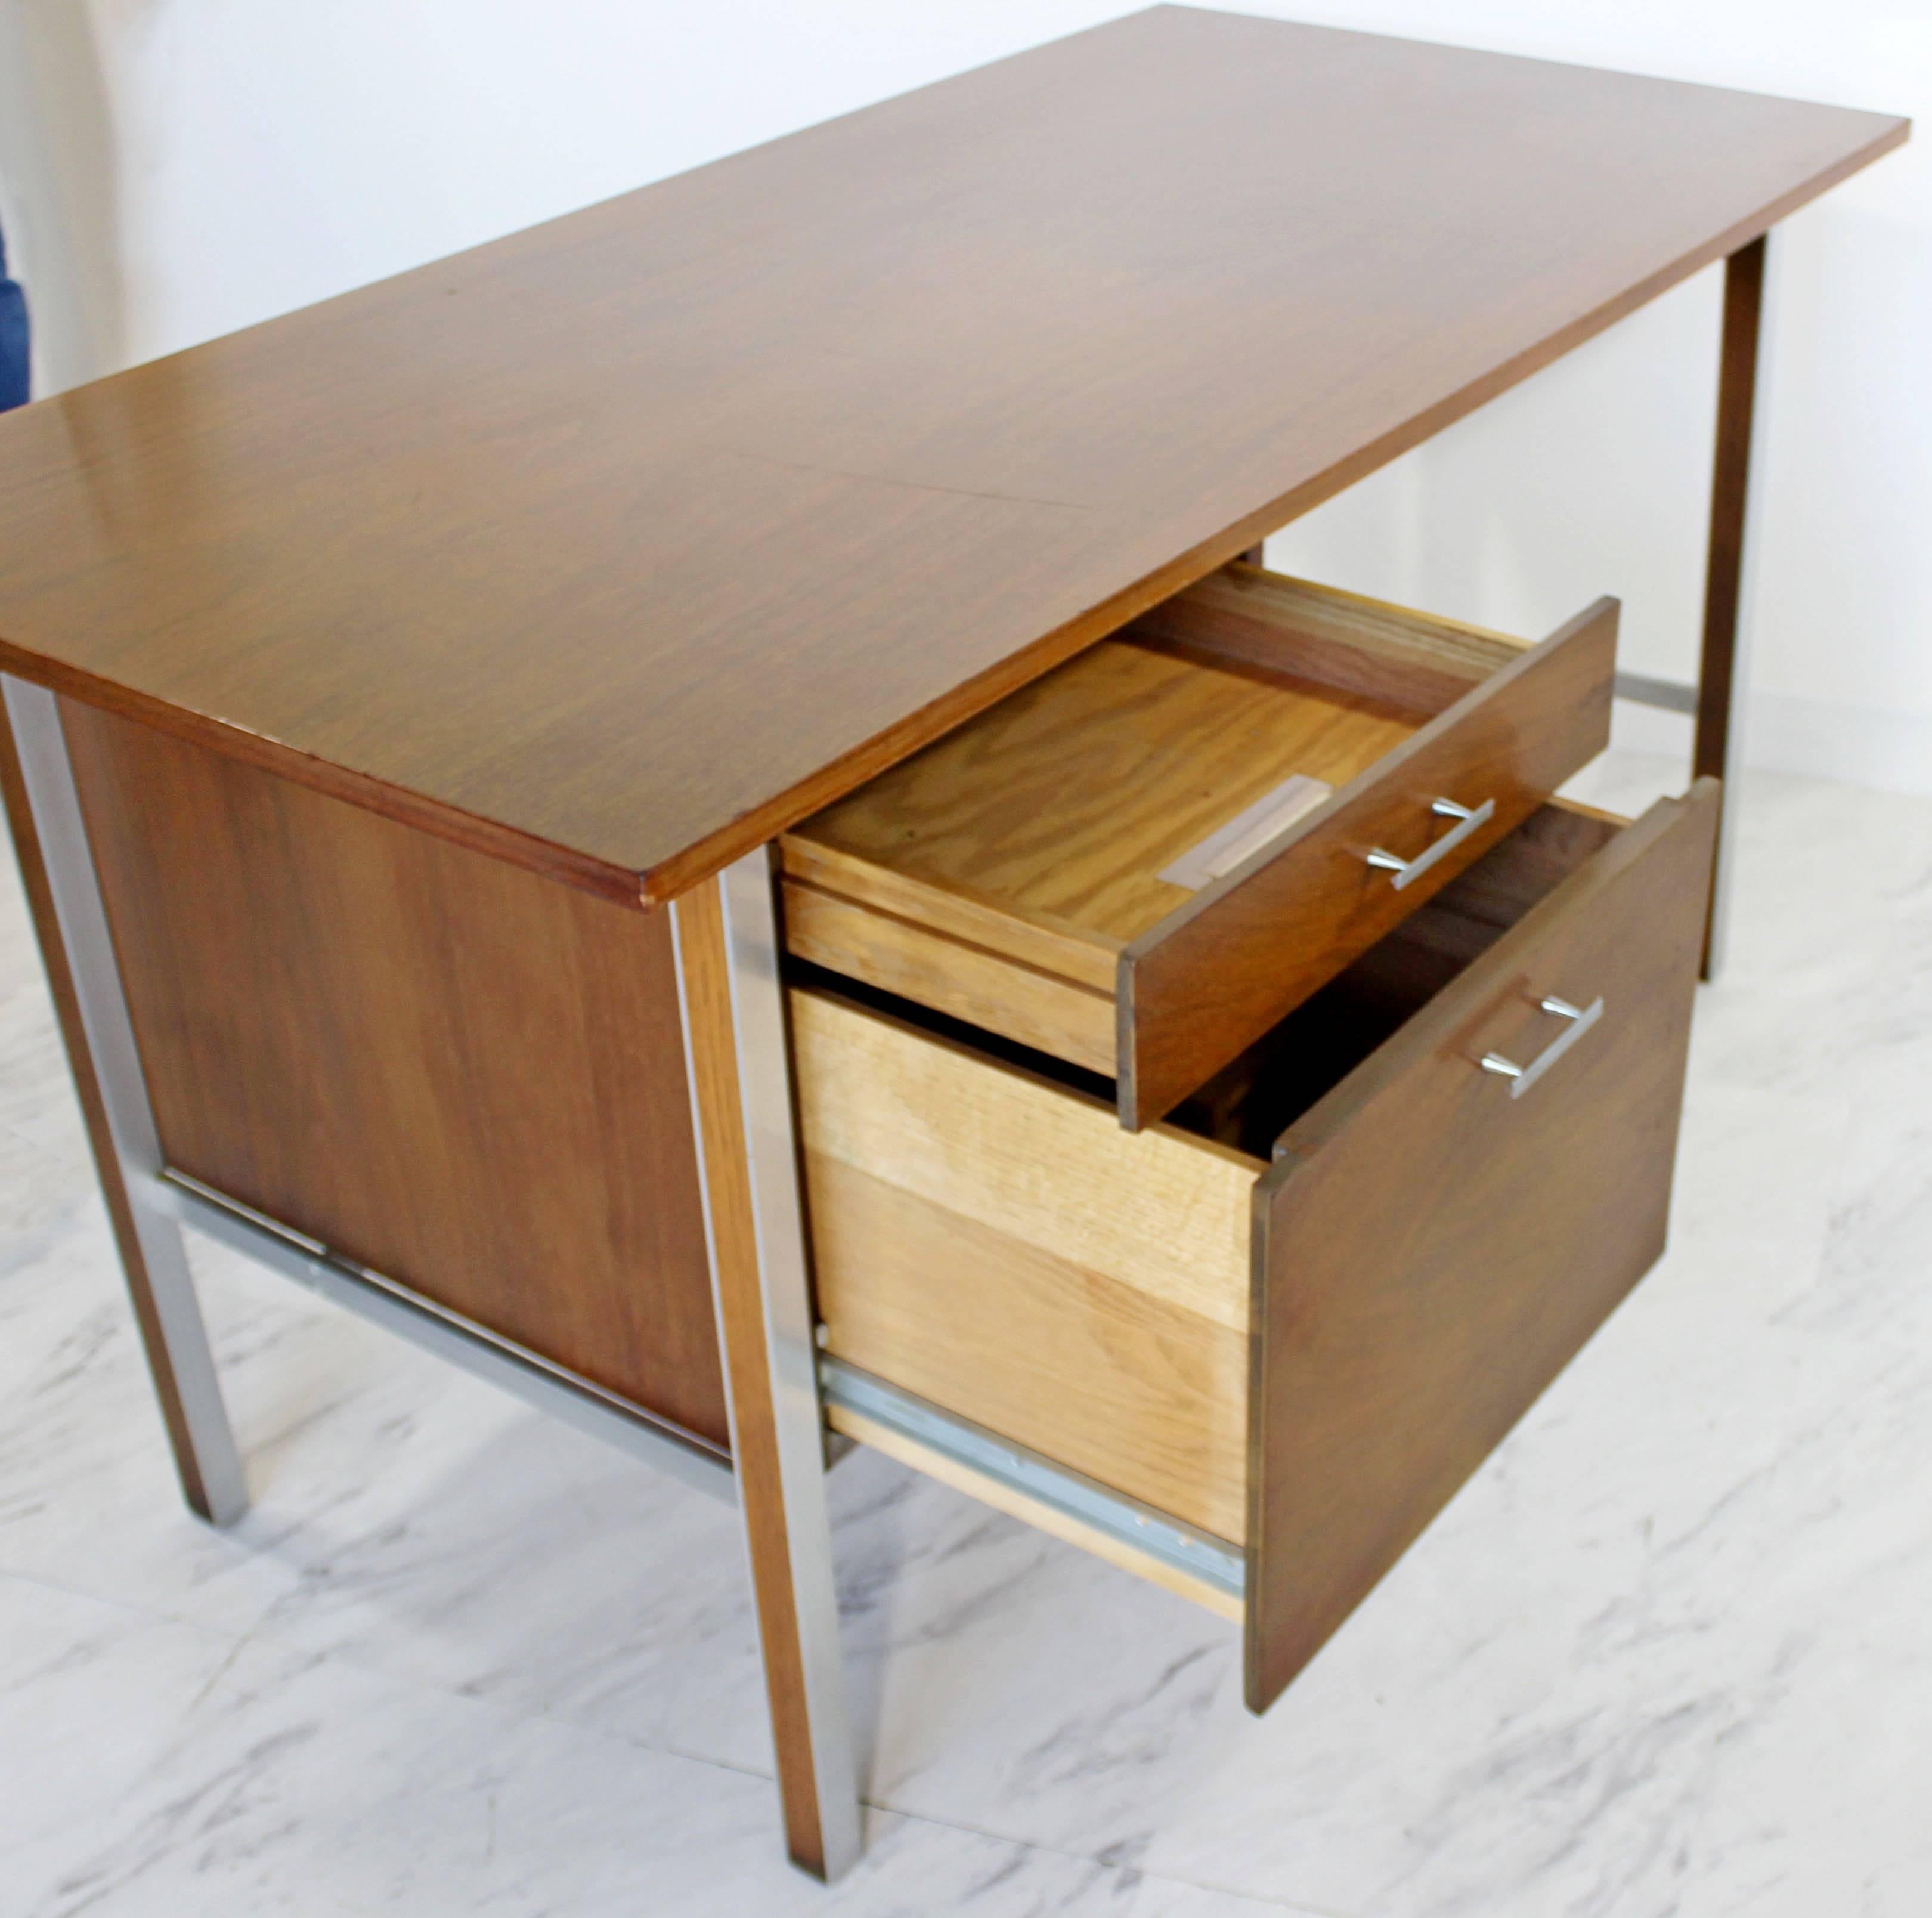 Mid-20th Century Mid-Century Modern Paul McCobb for Calvin Walnut Wood Desk with Two Drawers